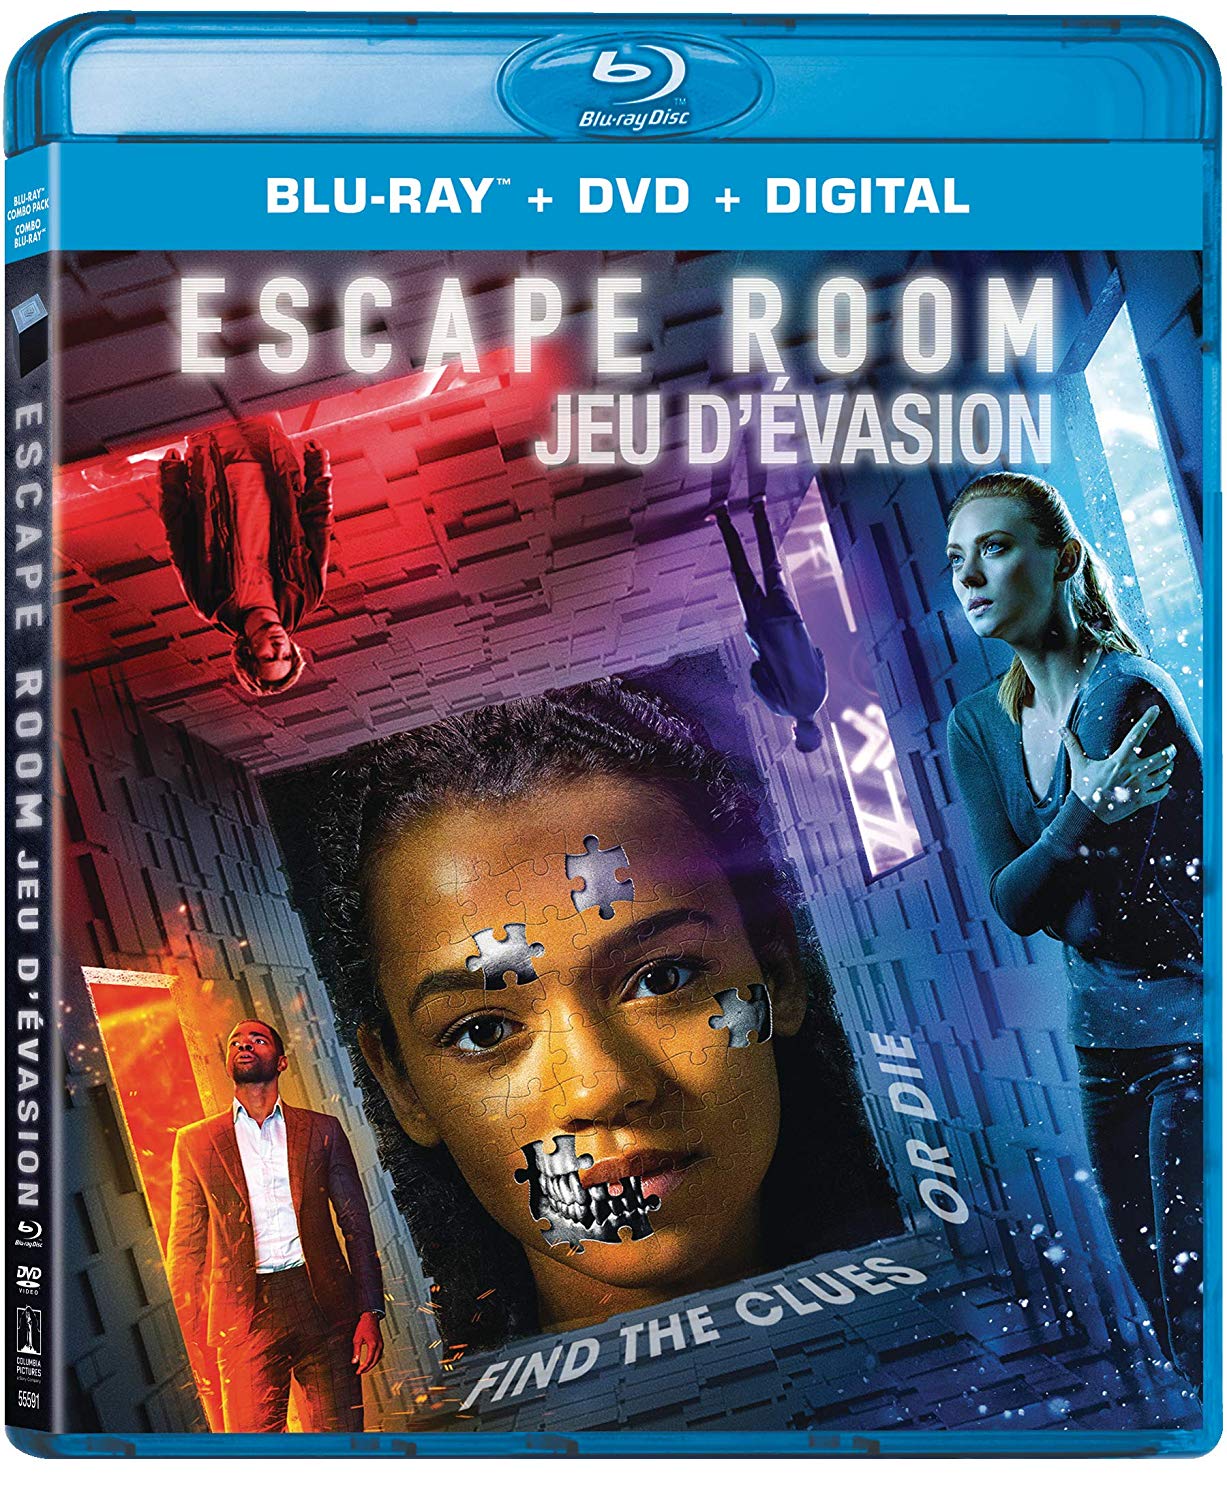 Escape Room on DVD and Blu-ray